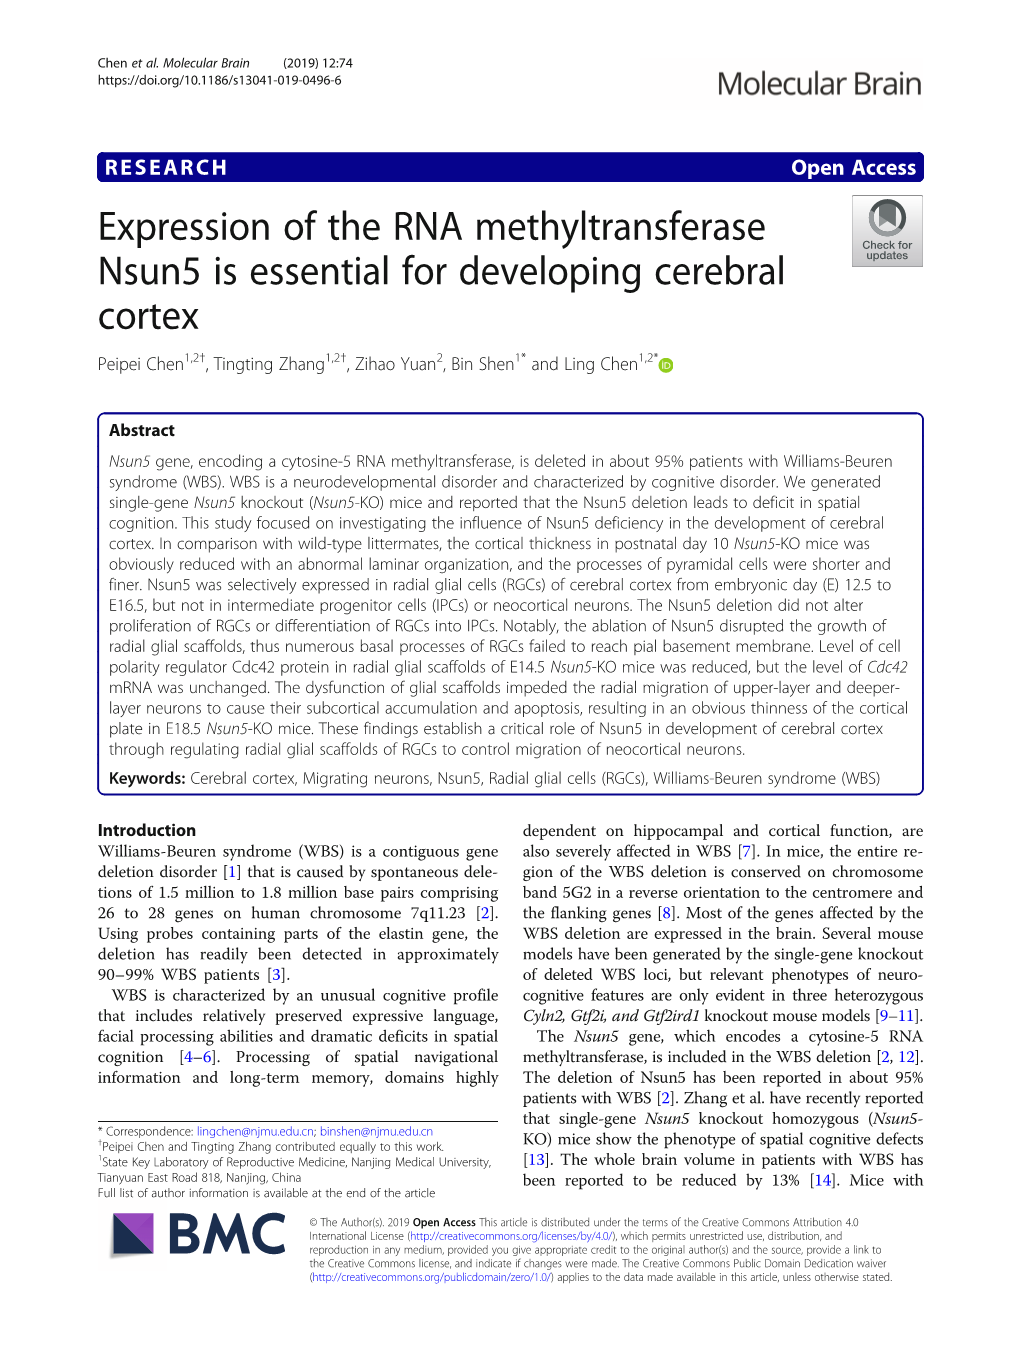 Expression of the RNA Methyltransferase Nsun5 Is